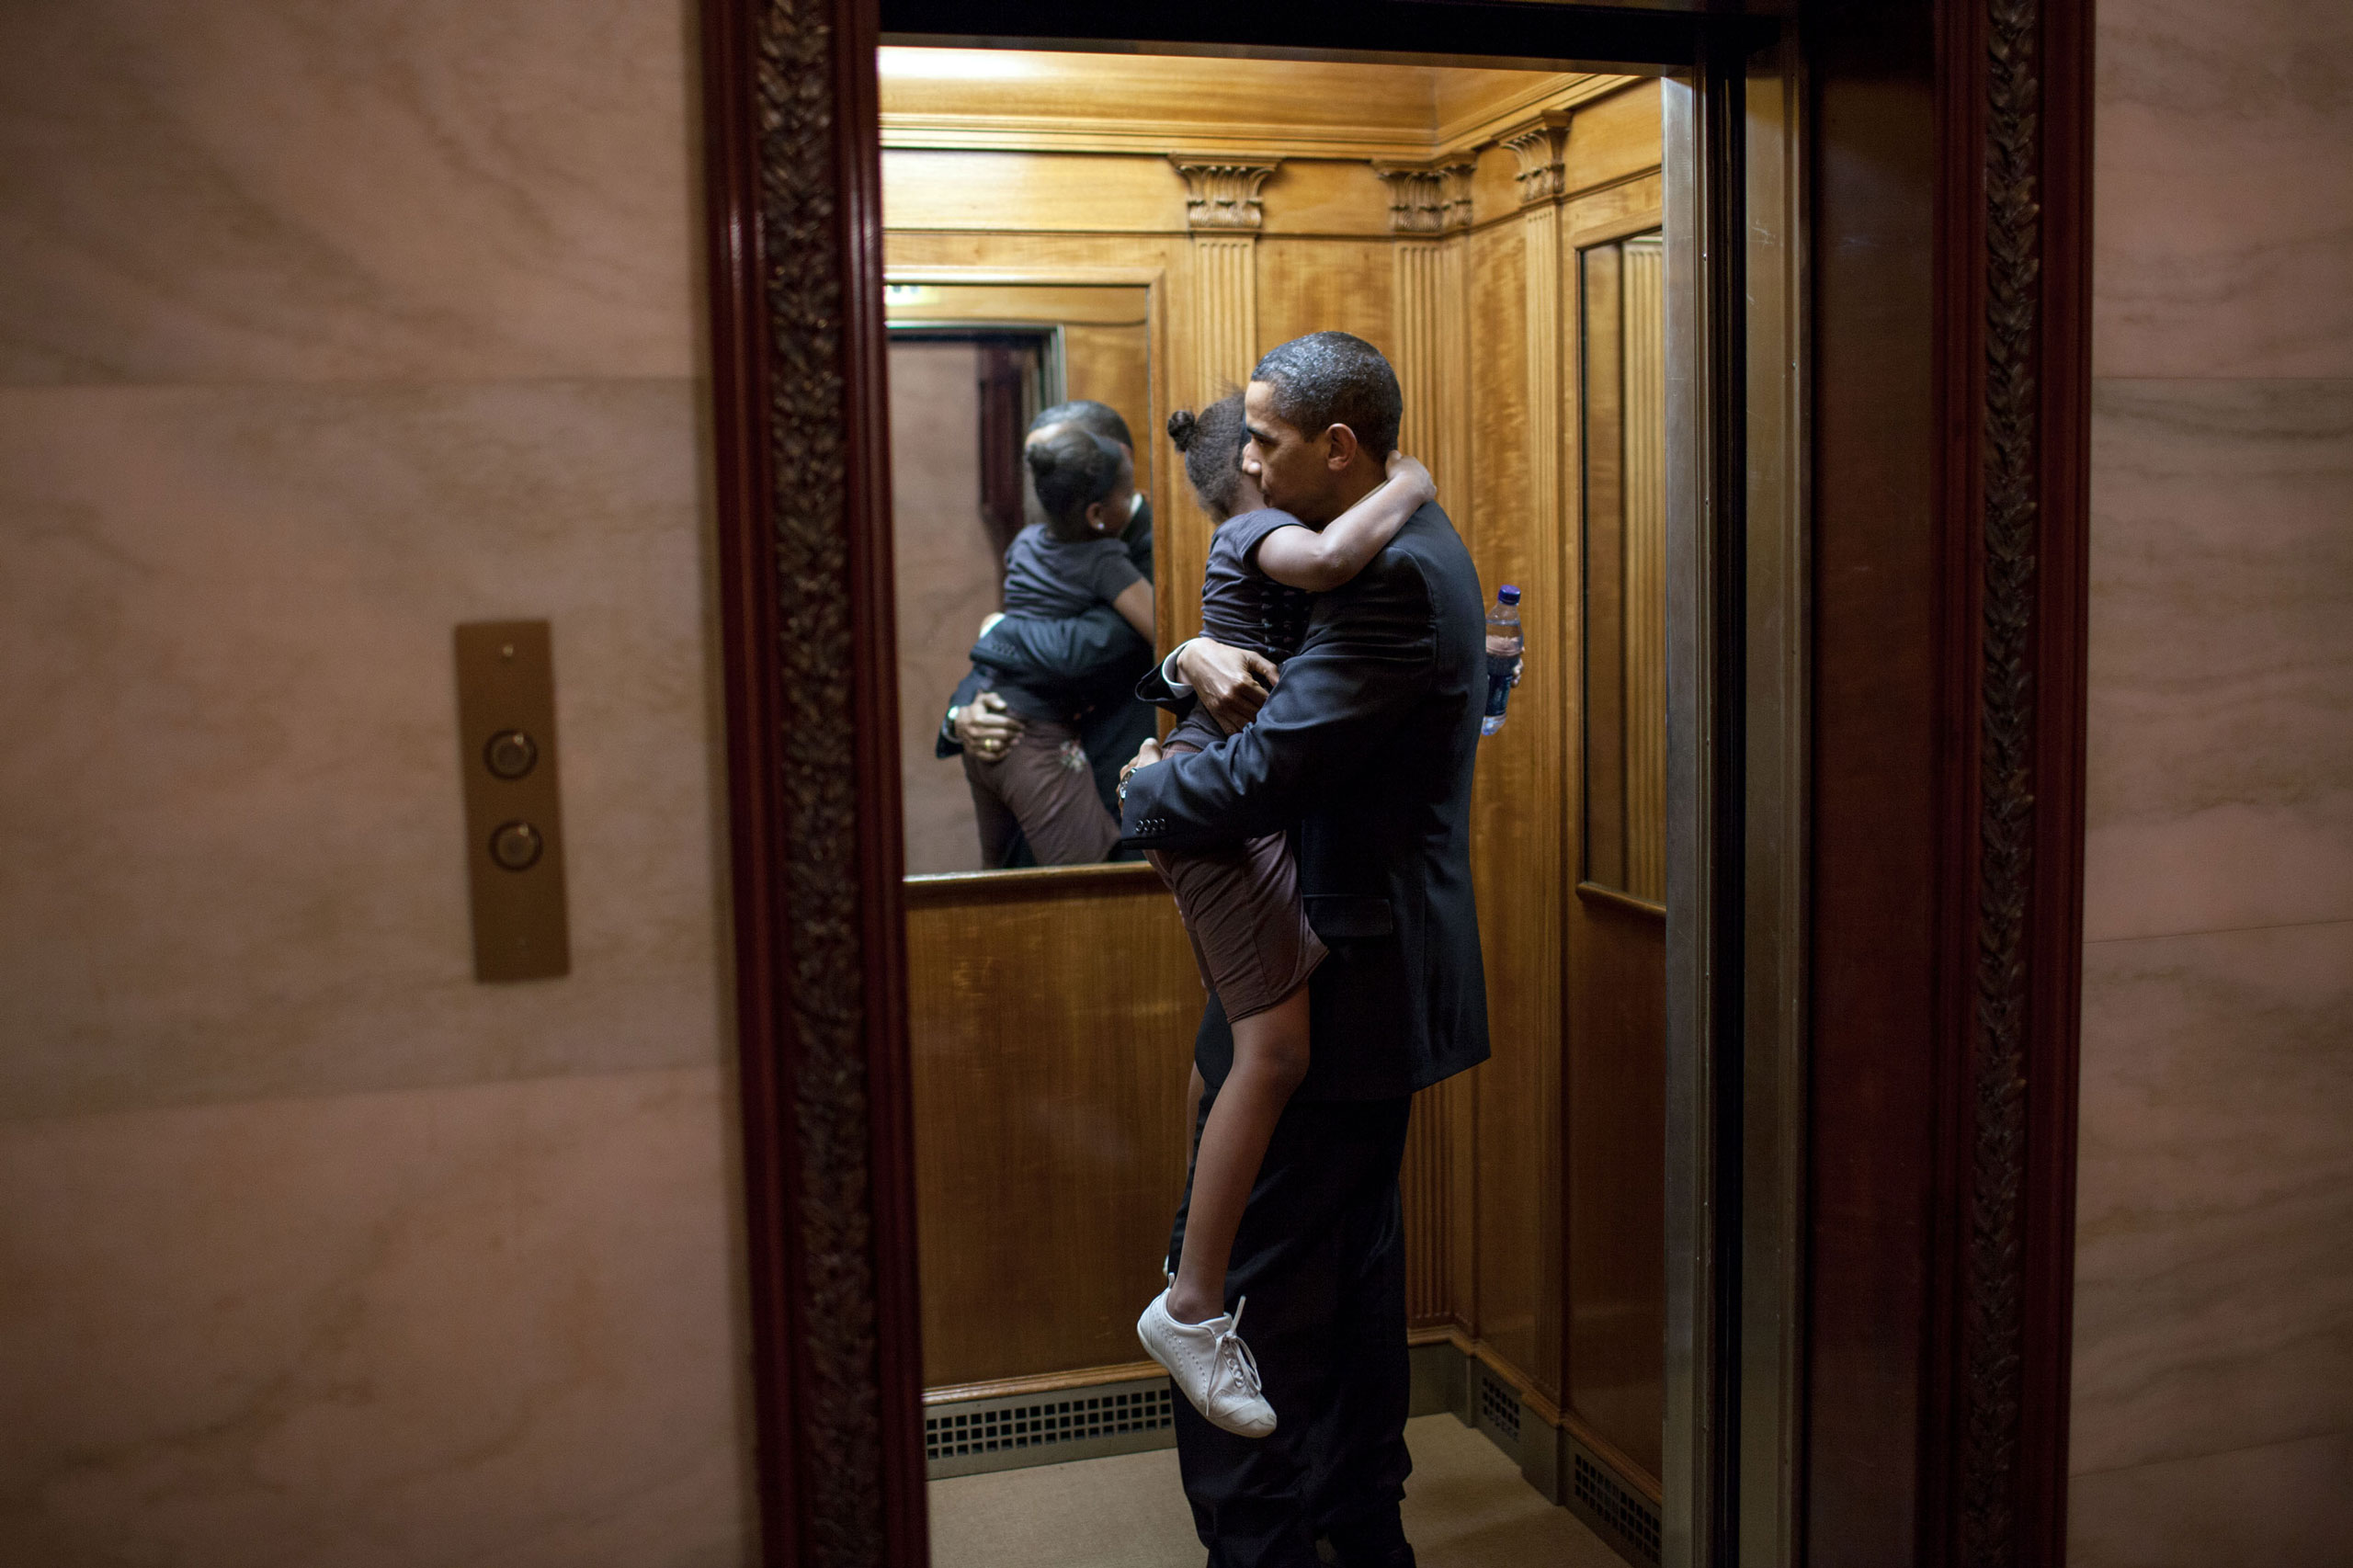 “The President was leaving the State Floor after an event and found Sasha in the elevator ready to head upstairs to the private residence. He decided to ride upstairs with her before returning to the Oval Office,”
                              May 19, 2009.